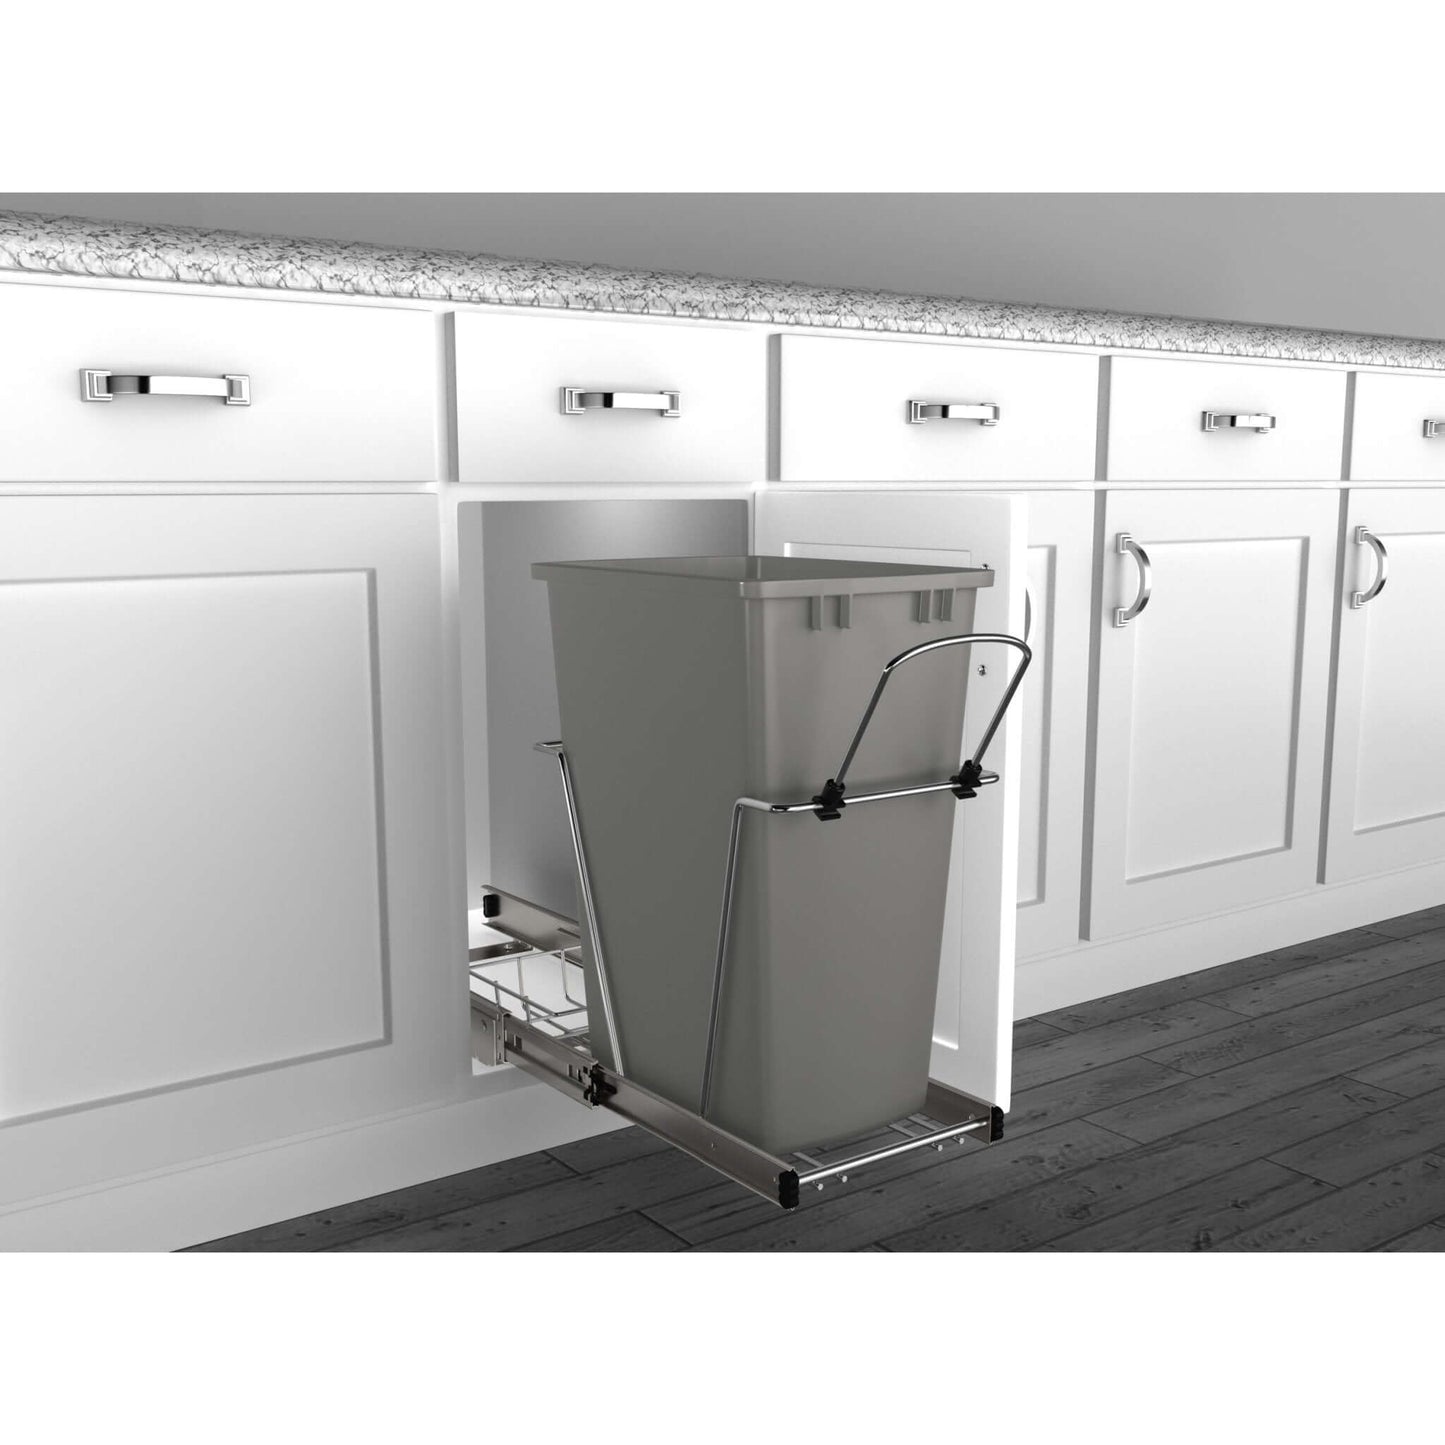 Rev-A-Shelf - Chrome Steel Pull Out Waste/Trash Container w/Rear Basket Storage - RV-12KD-17C S